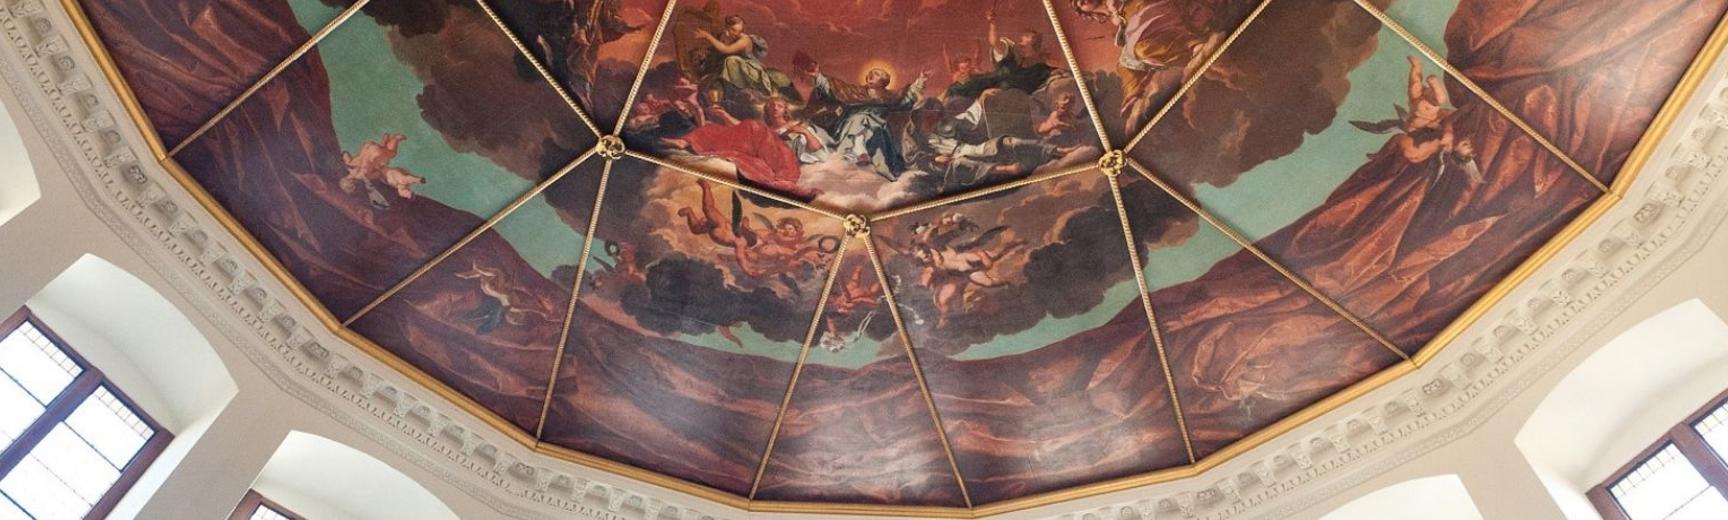 Photo of the Sheldonian Theatre painted ceiling